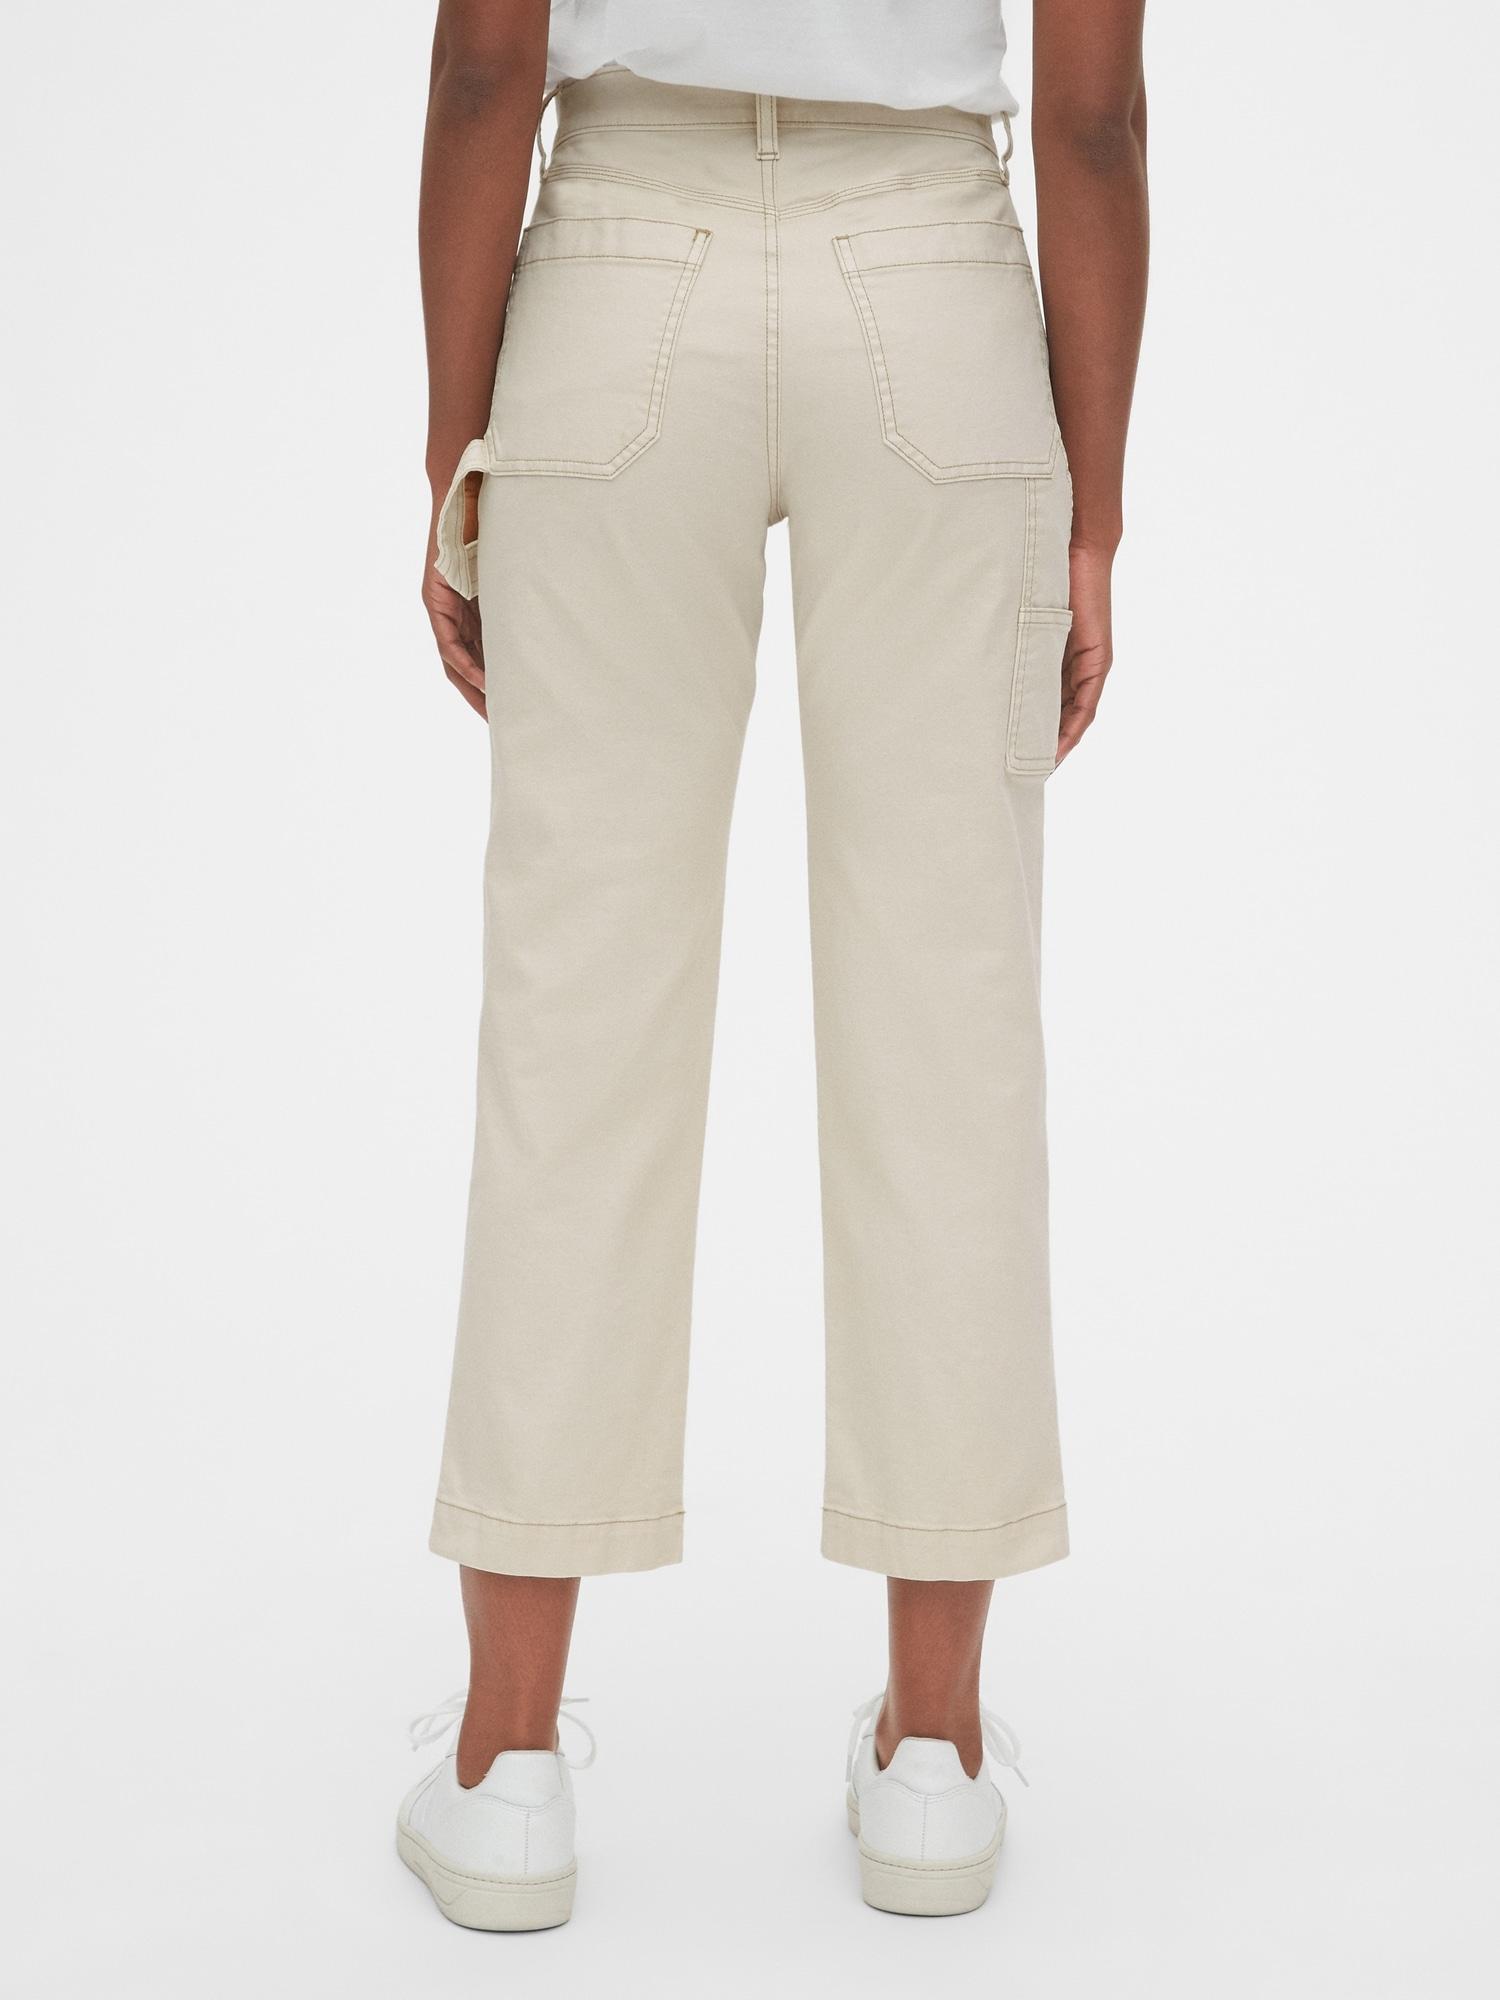 Gap High Rise '90s Loose Faux-Leather Cargo Pants | Southcentre Mall